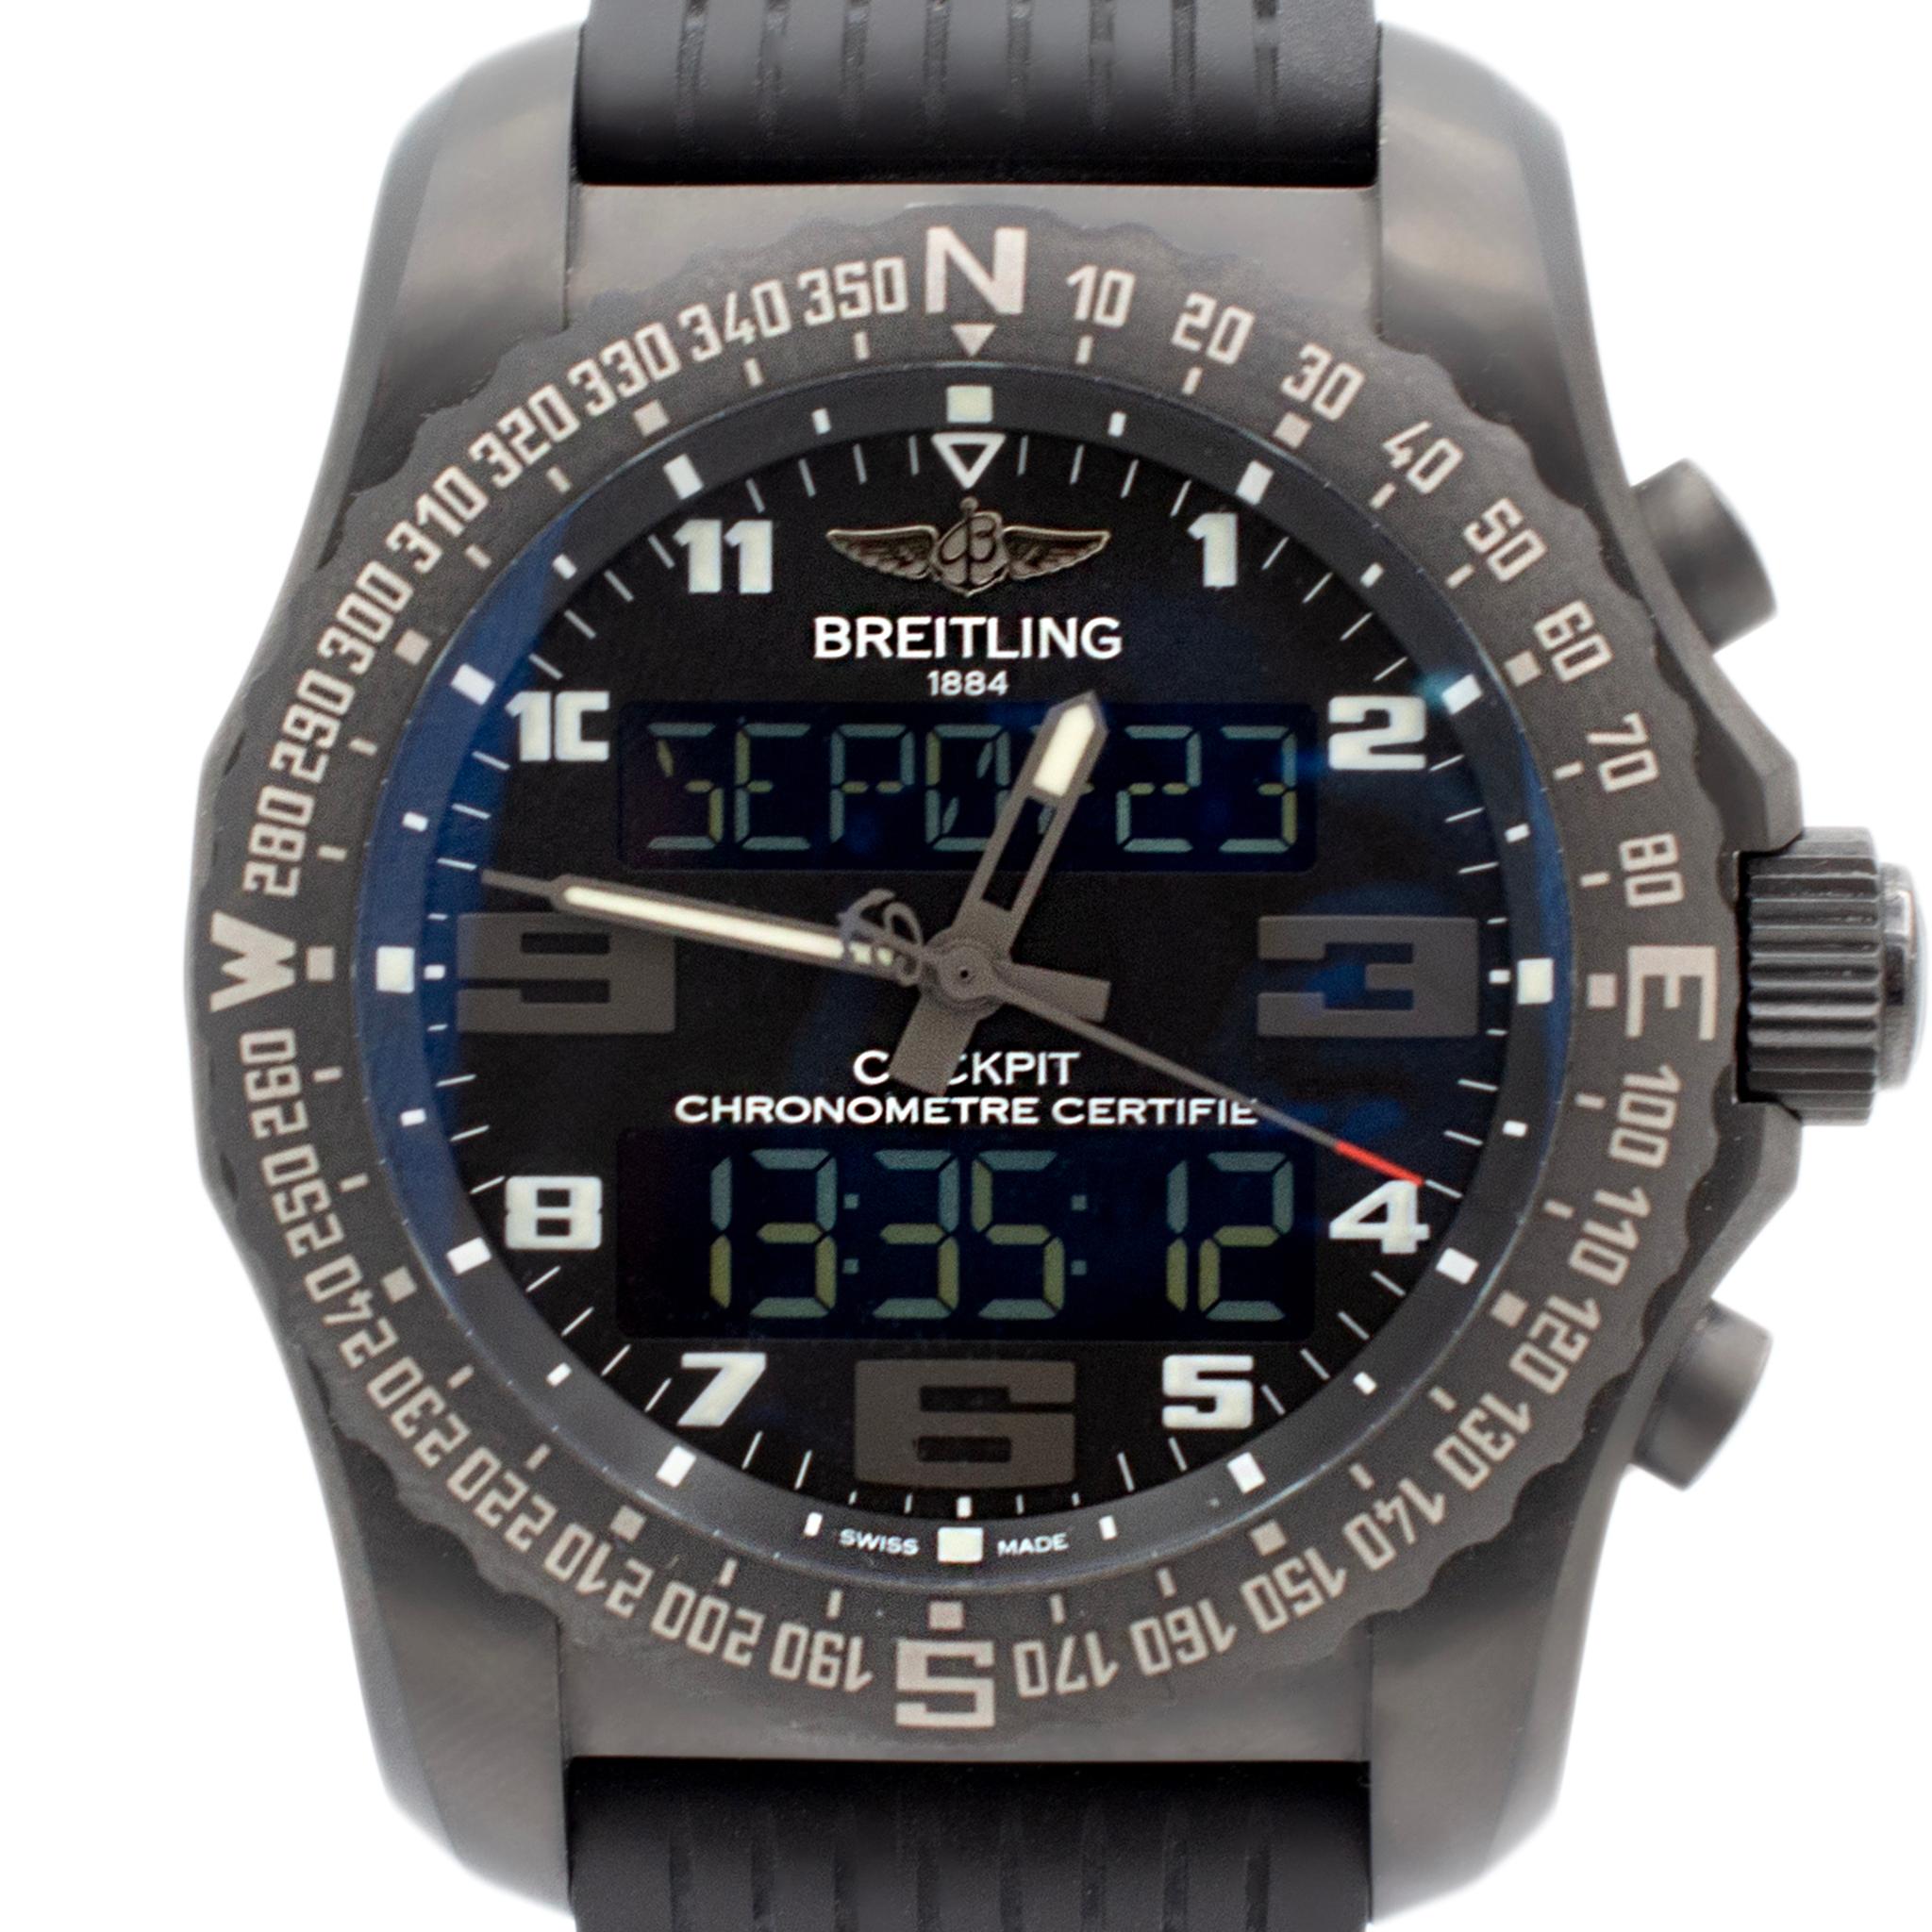 Brand: Breitling

Gender: Men

Metal Type: Titanium

Diameter: 46.00 mm

Weight: 130.59 grams

One men's titanium, BREITLING Swiss-made watch with original box and papers. The 